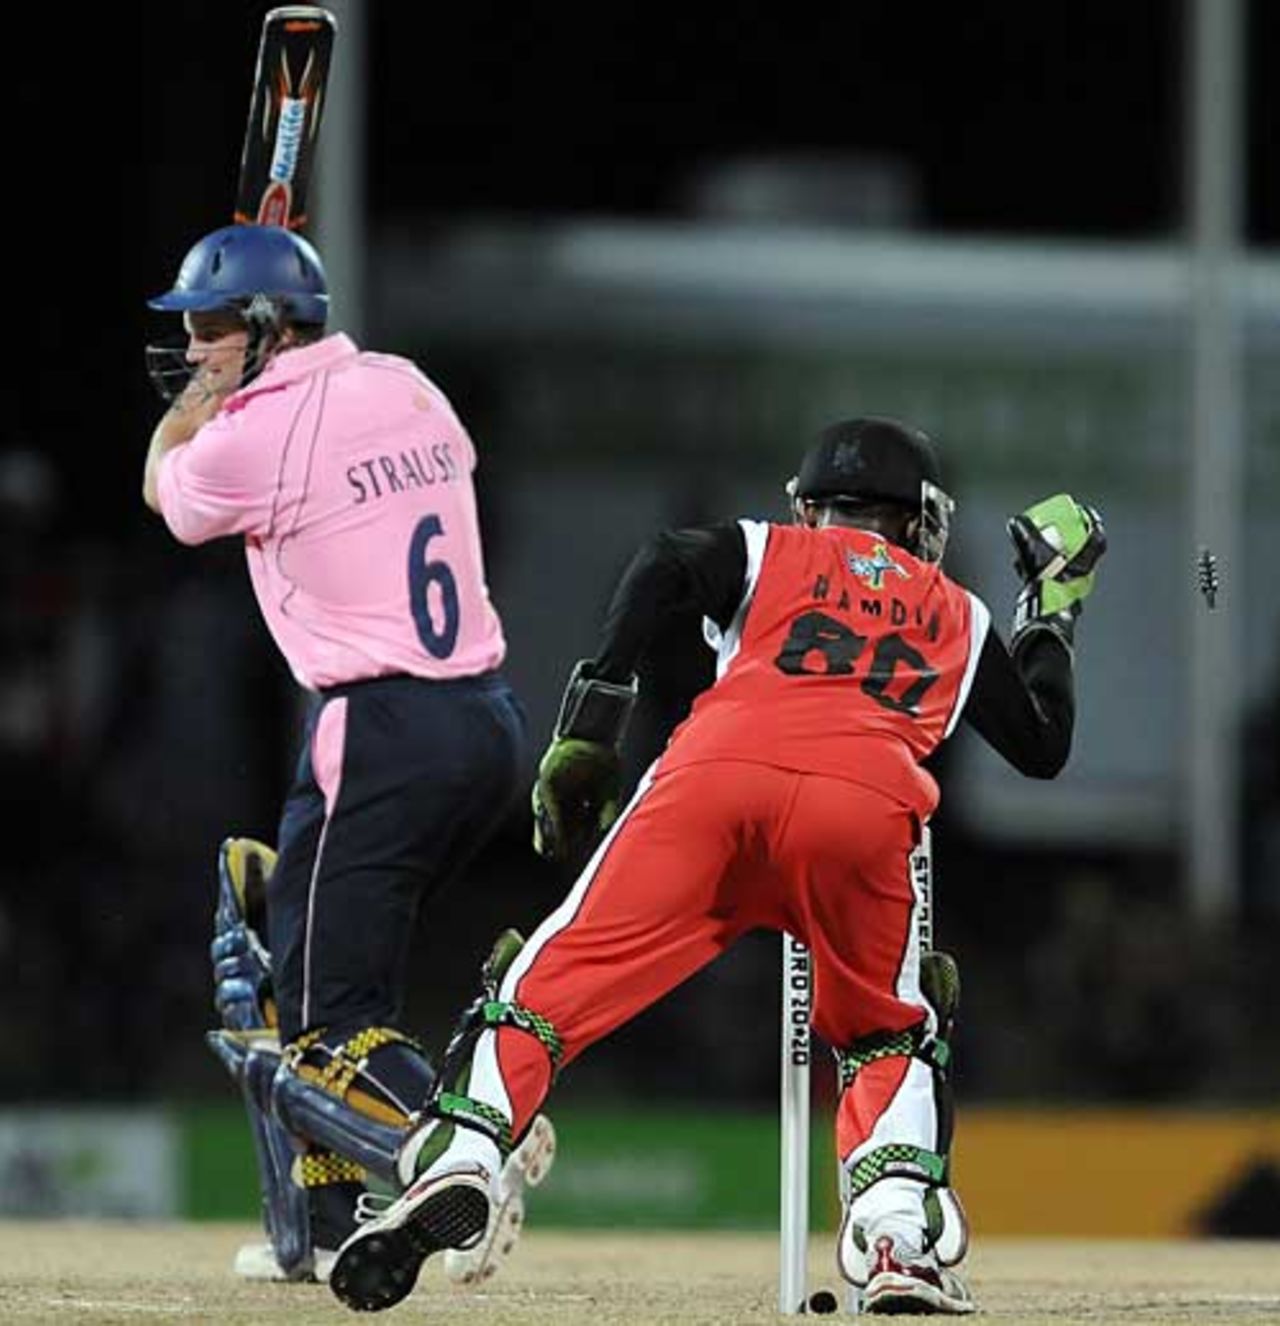 Andrew Strauss charges and is stumped for 20, Trinidad & Tobago v Middlesex, Antigua, October 27, 2008